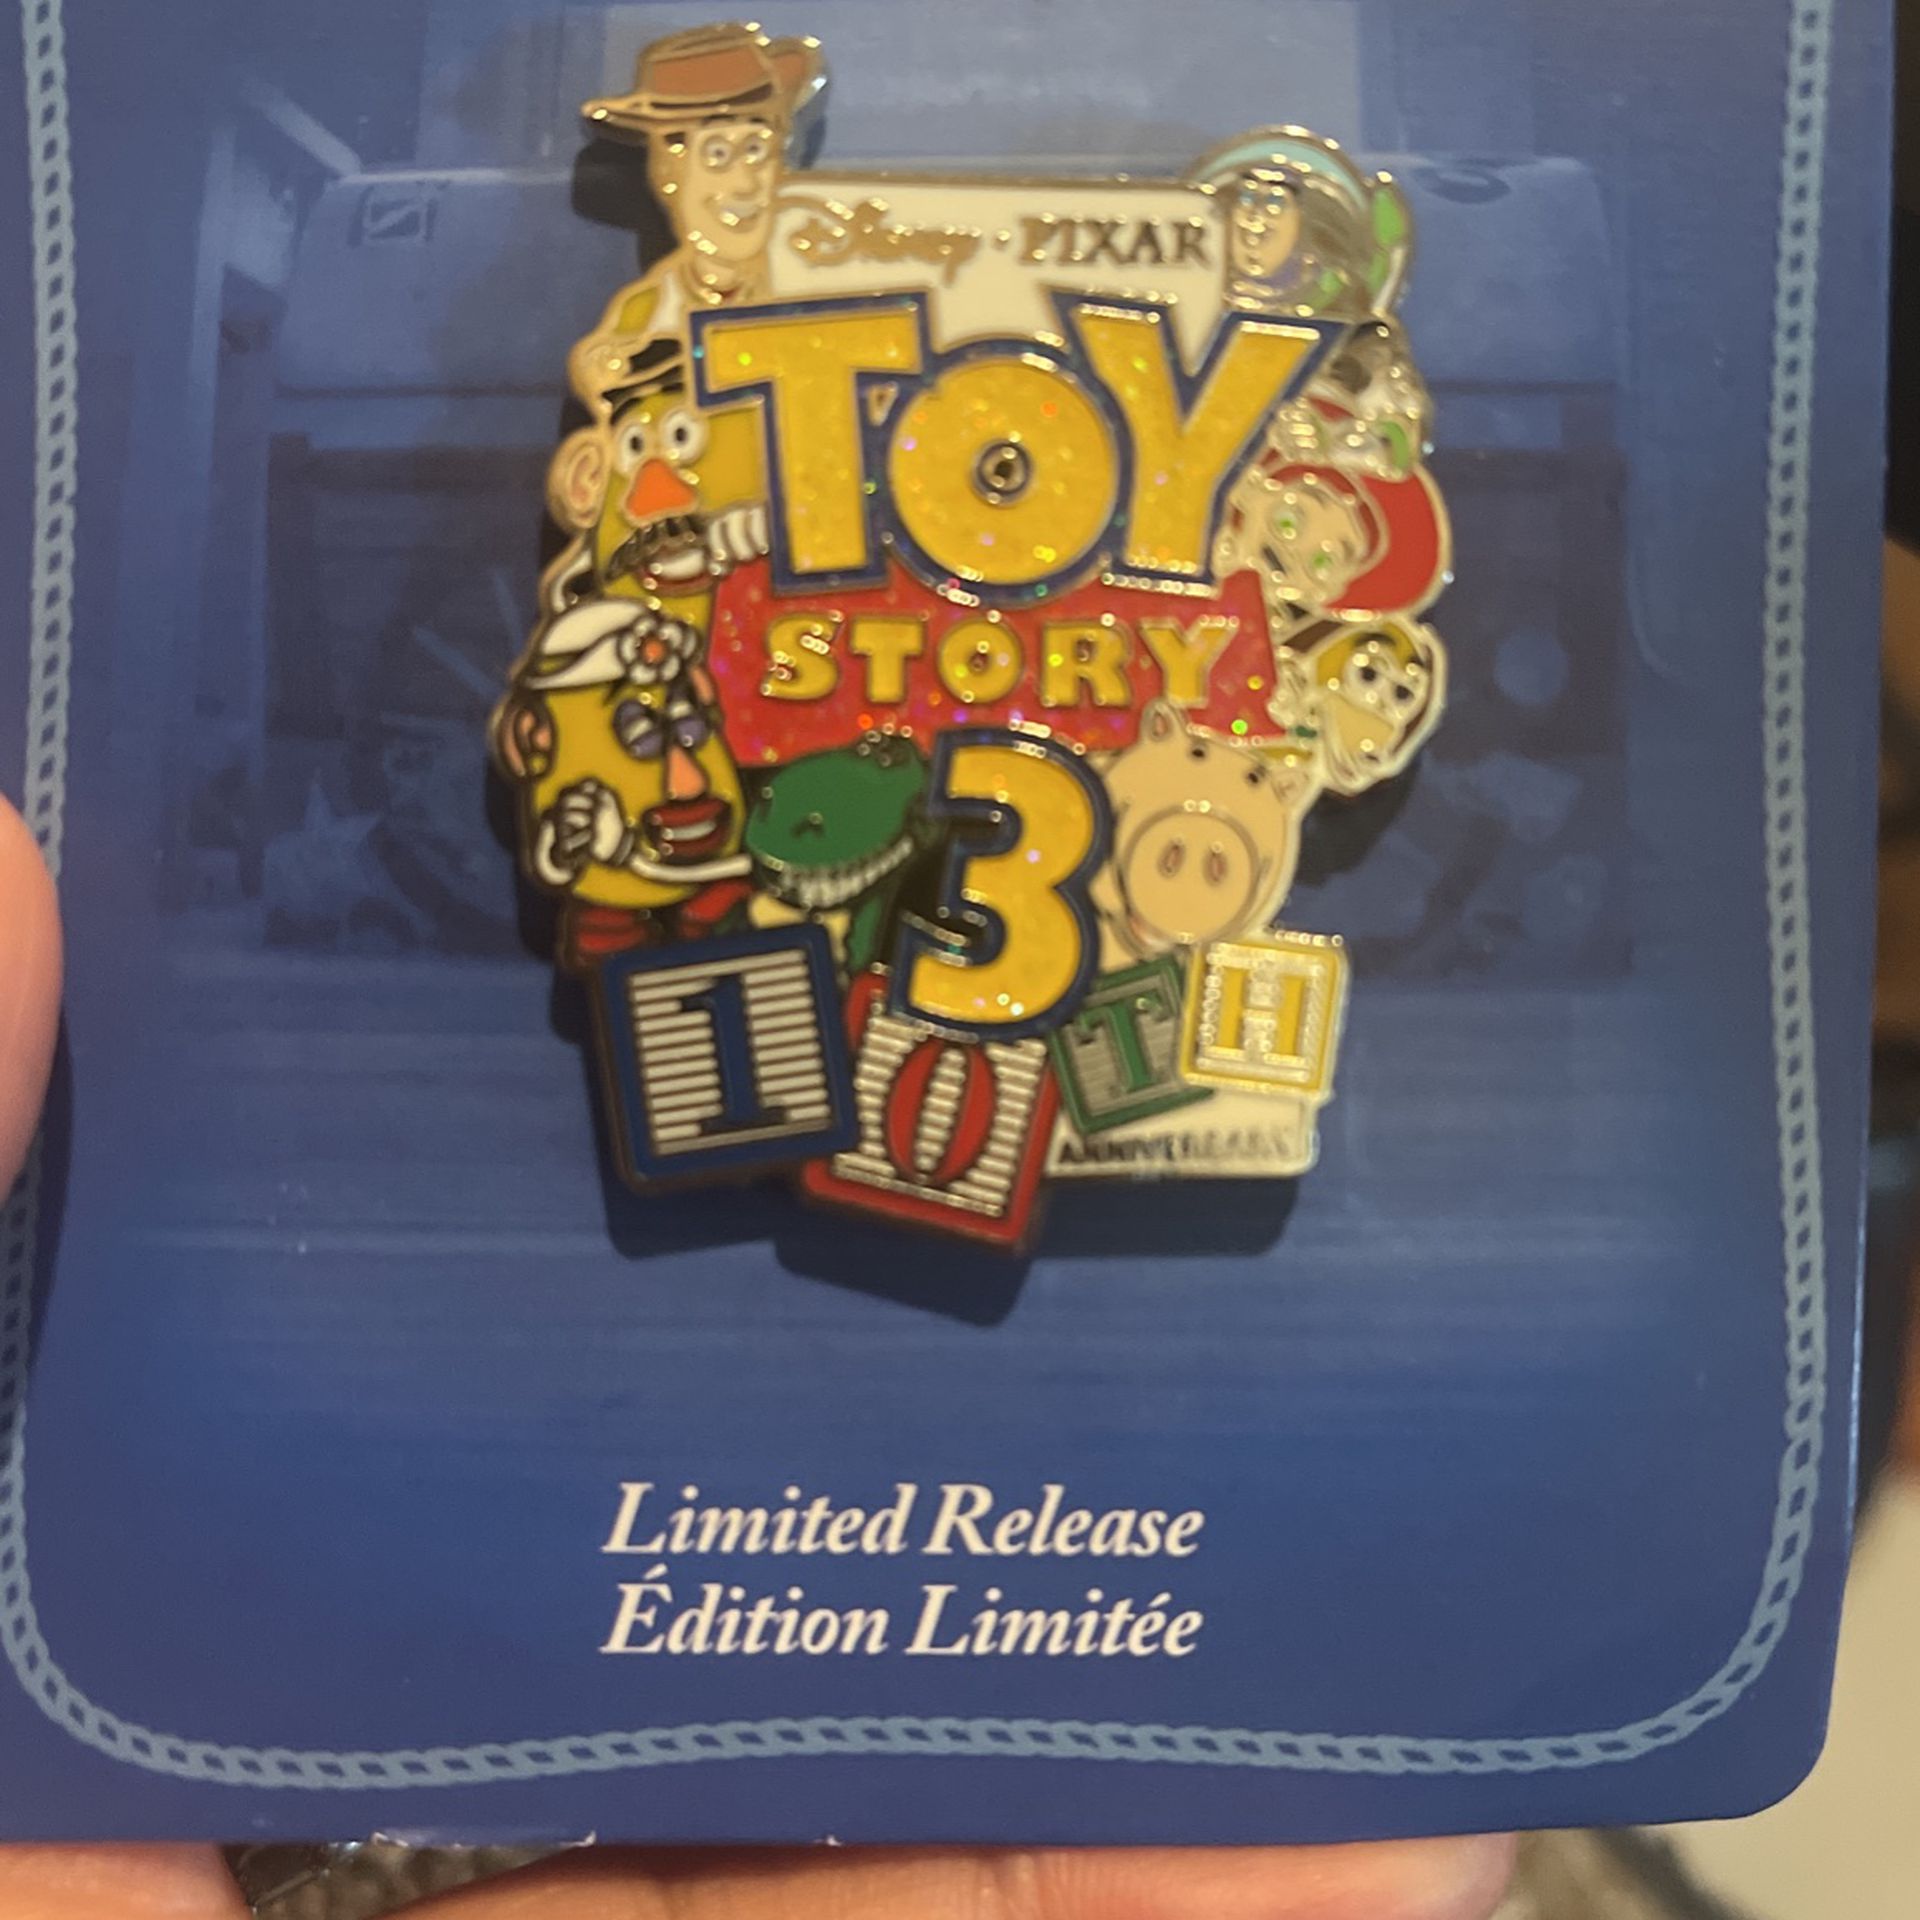 Toy Story 3 Limited Edition 